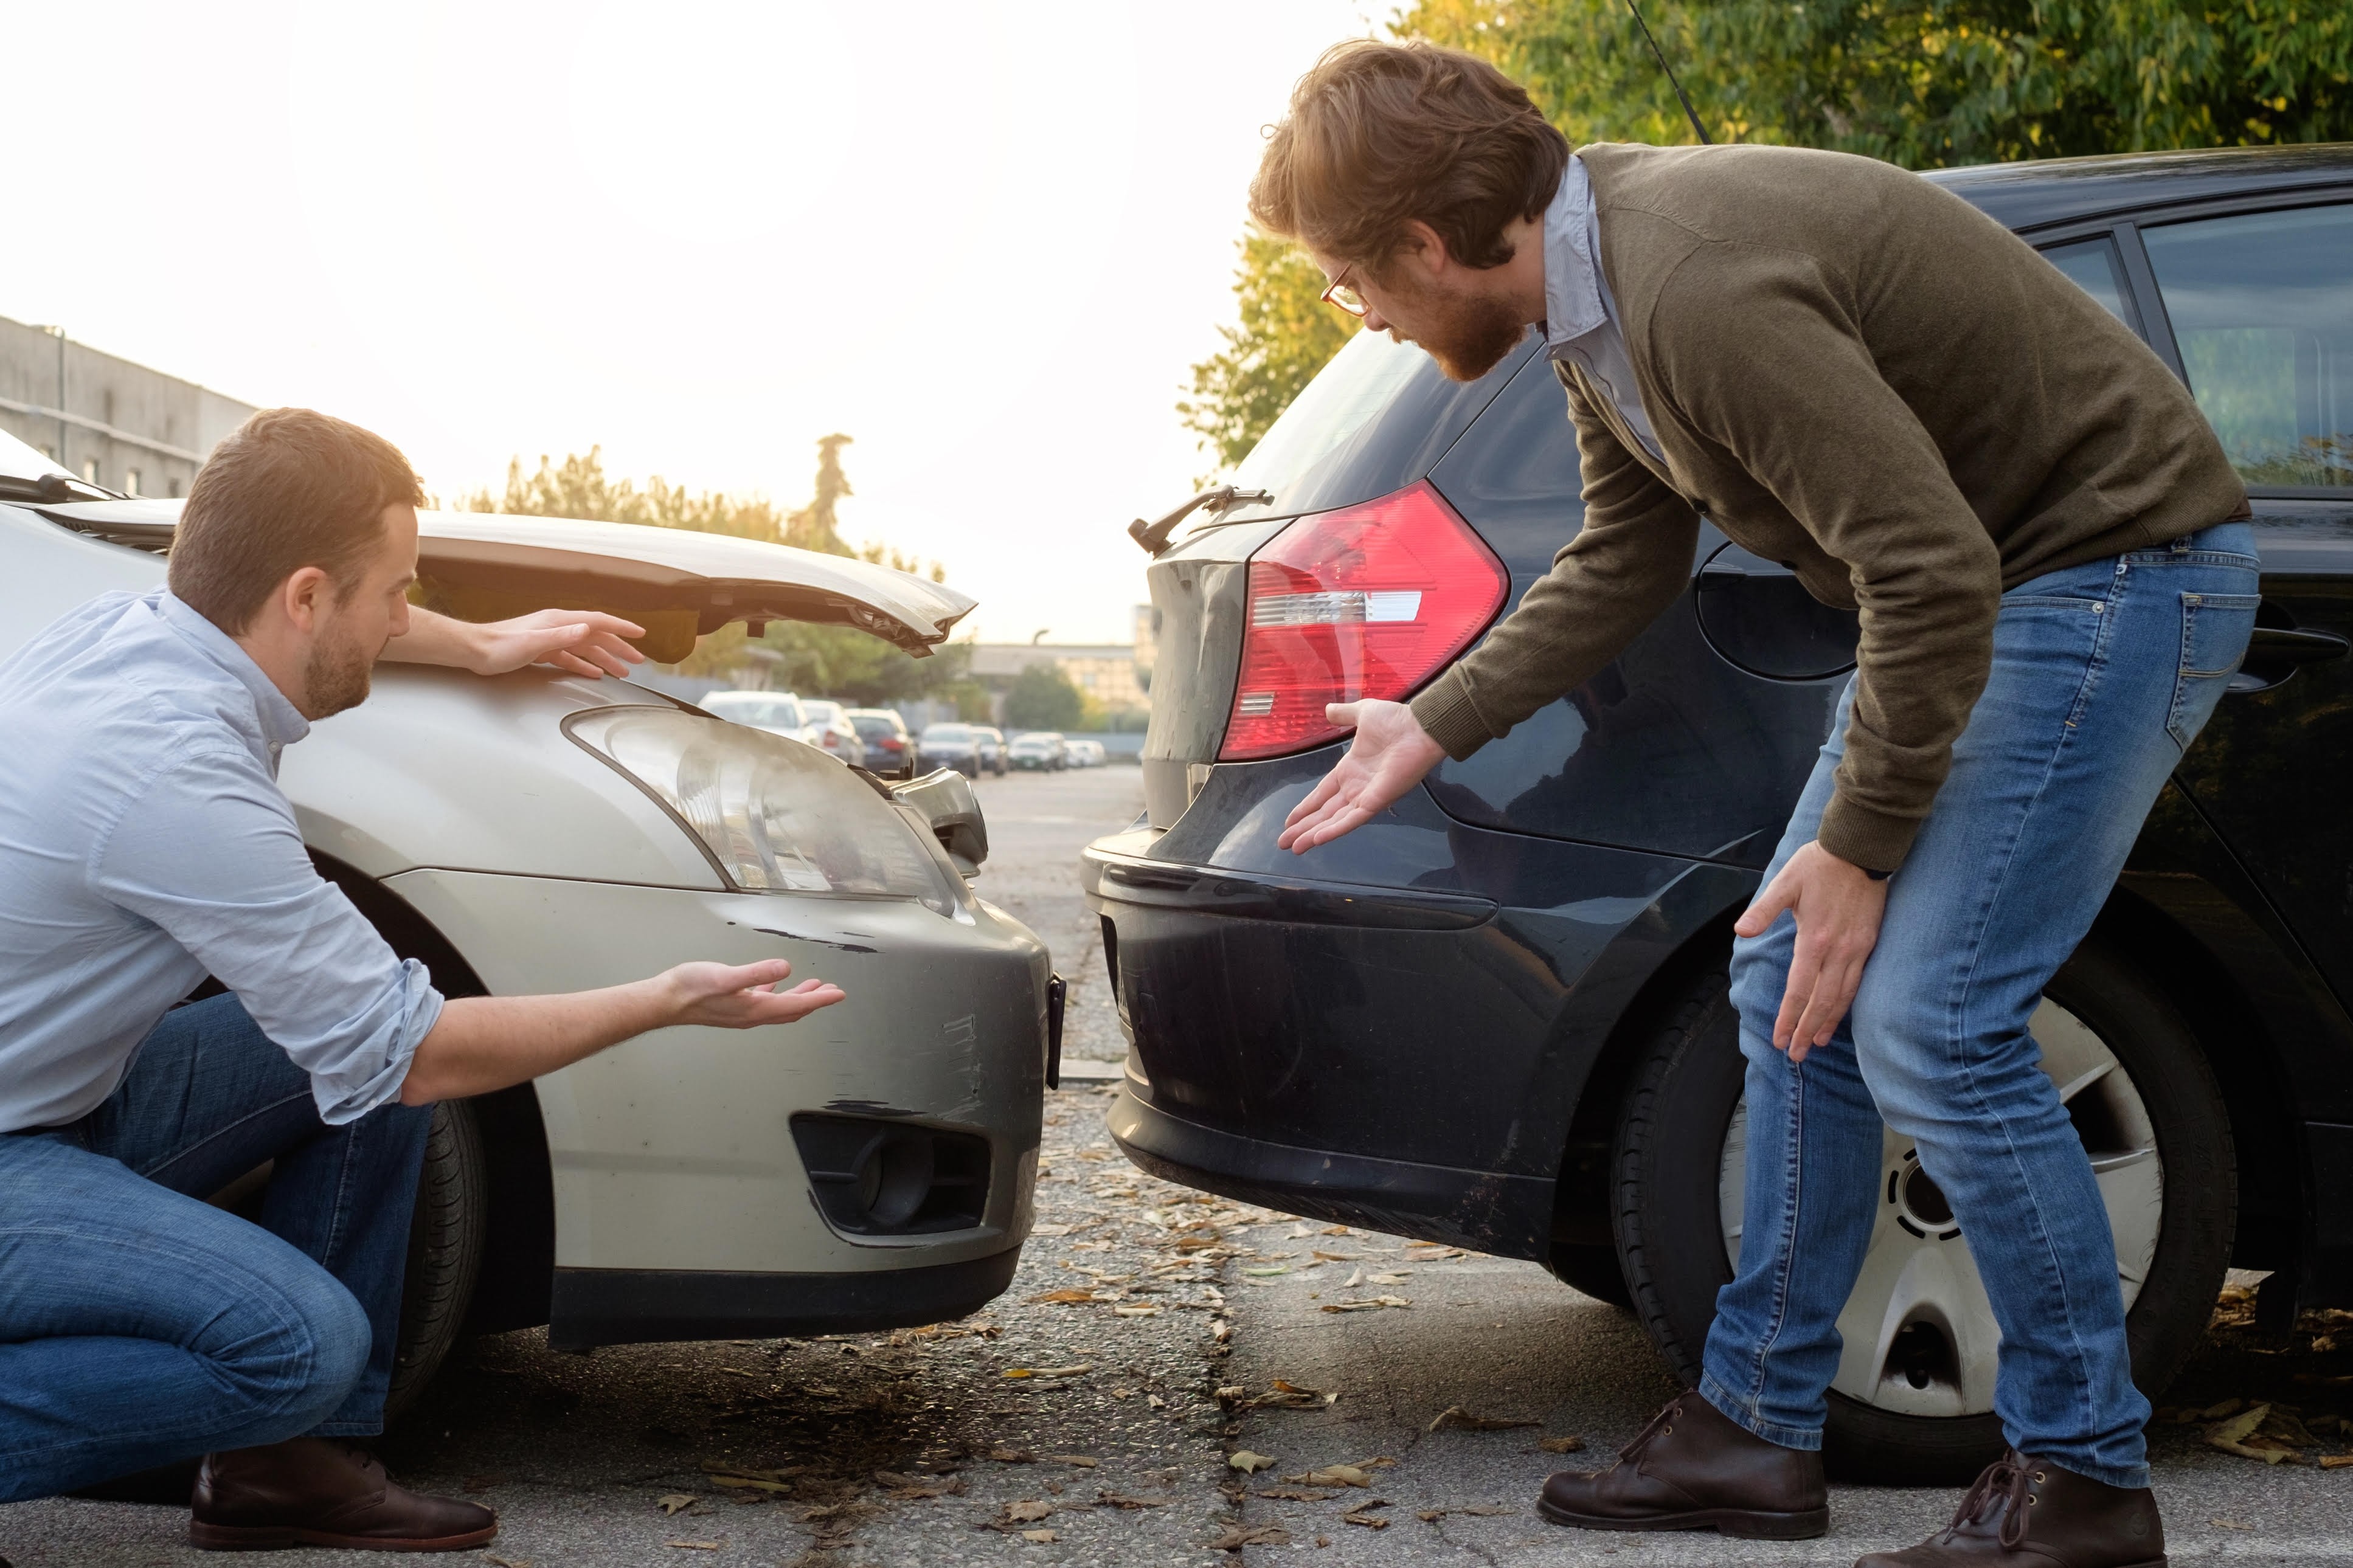 Can You Guess The Real Cost of a Fender Bender?